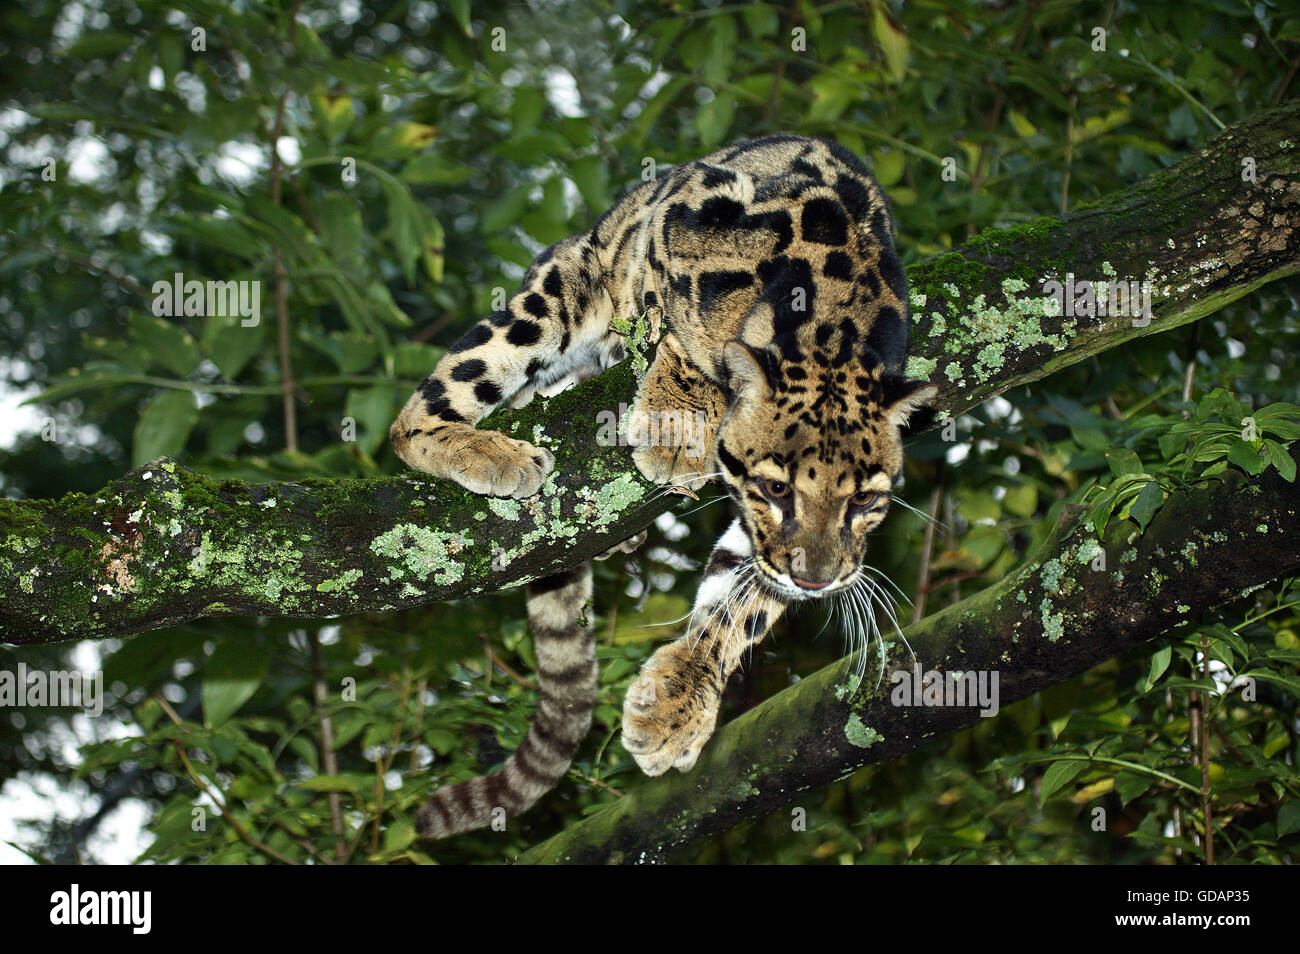 Clouded Leopard, neofelis nebulosa, Adult in Tree Stock Photo